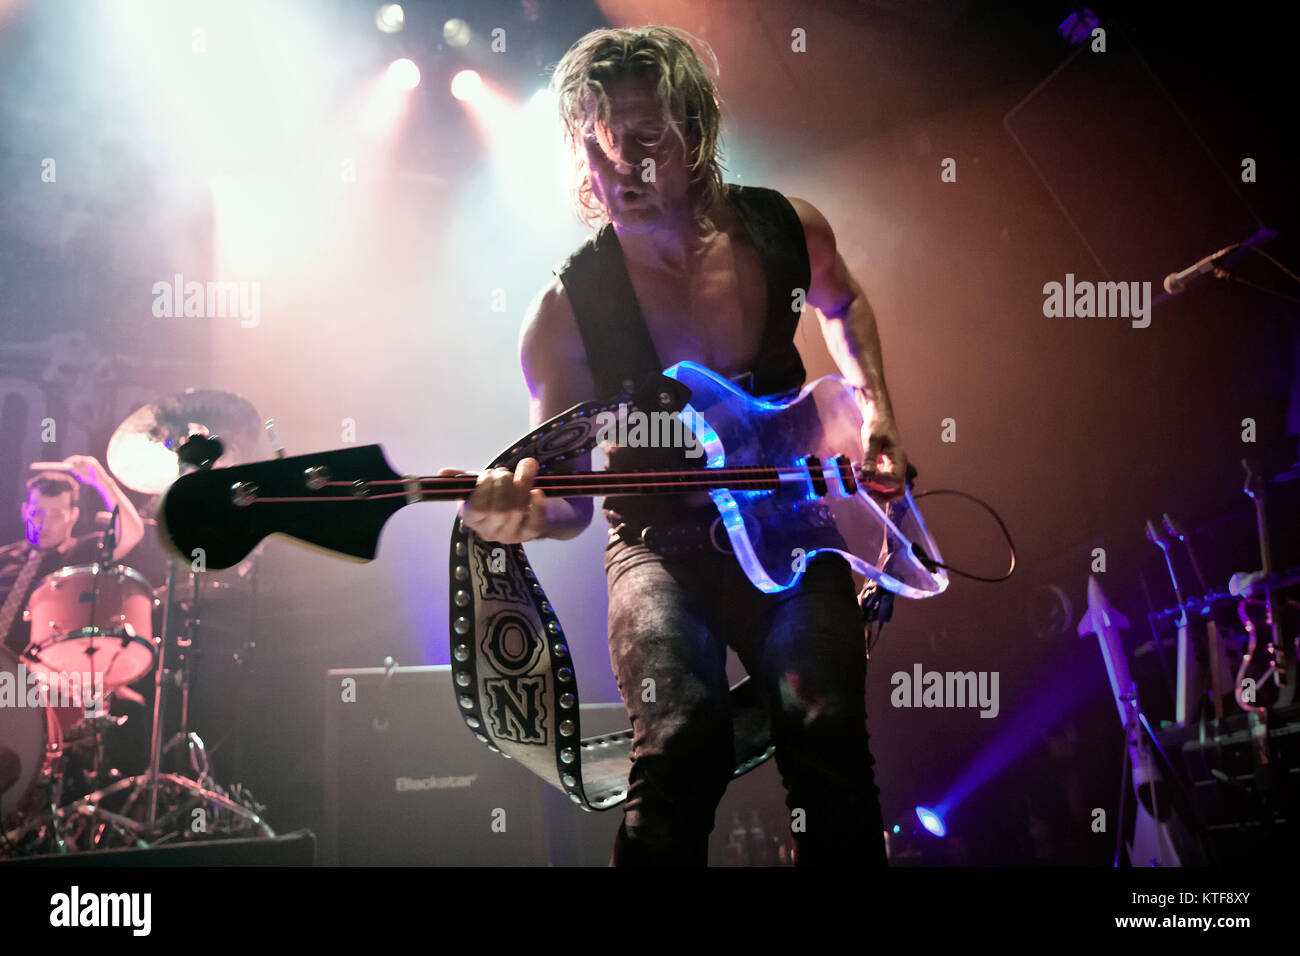 The Danish rock band D-A-D performs a live concert at Rockefeller in Oslo. The band was originally called “Disneyland After Dark” but had a lawsuit from The Walt Disney Company. Here musician Stig Pedersen on bass is seen live on stage. Norway, 17/03 2012. Stock Photo